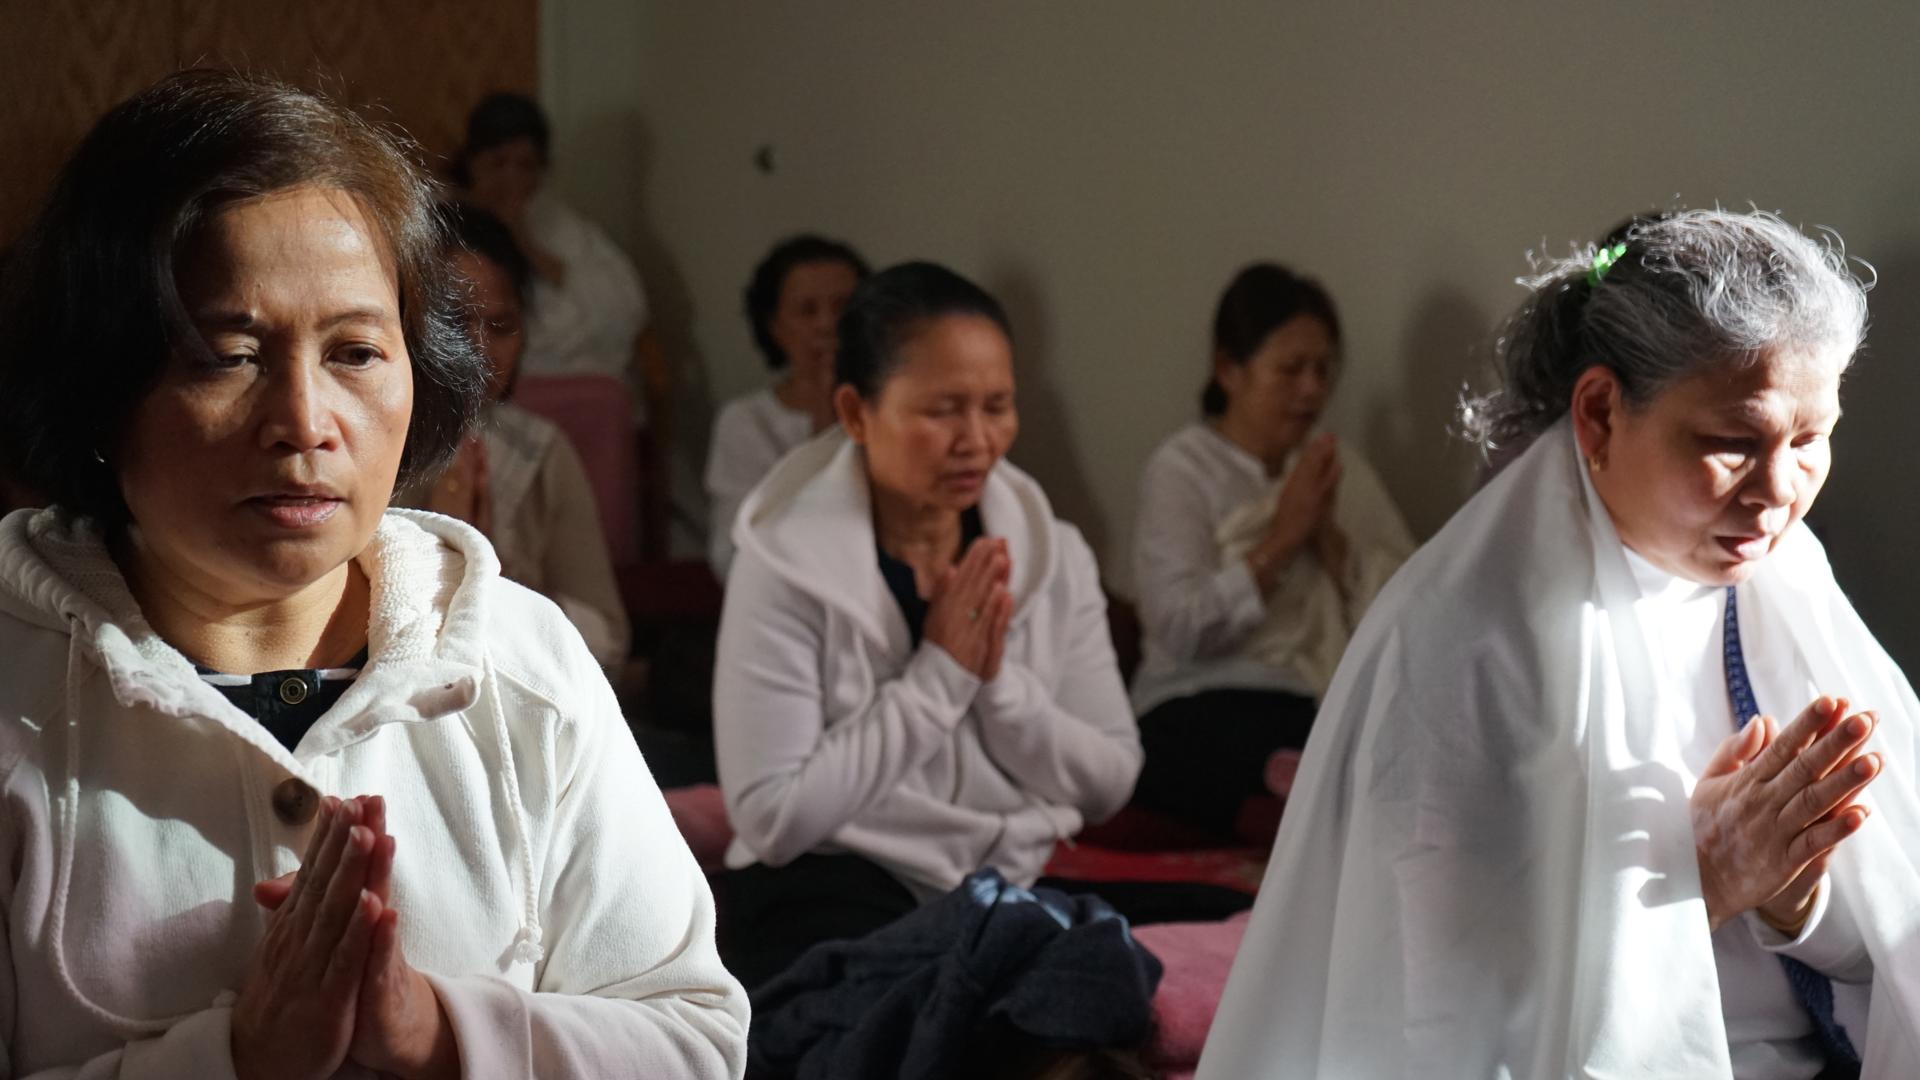 Cambodian women meditating in the Metta Center's meditation lounge, sitting cross-legged with palms pressed together